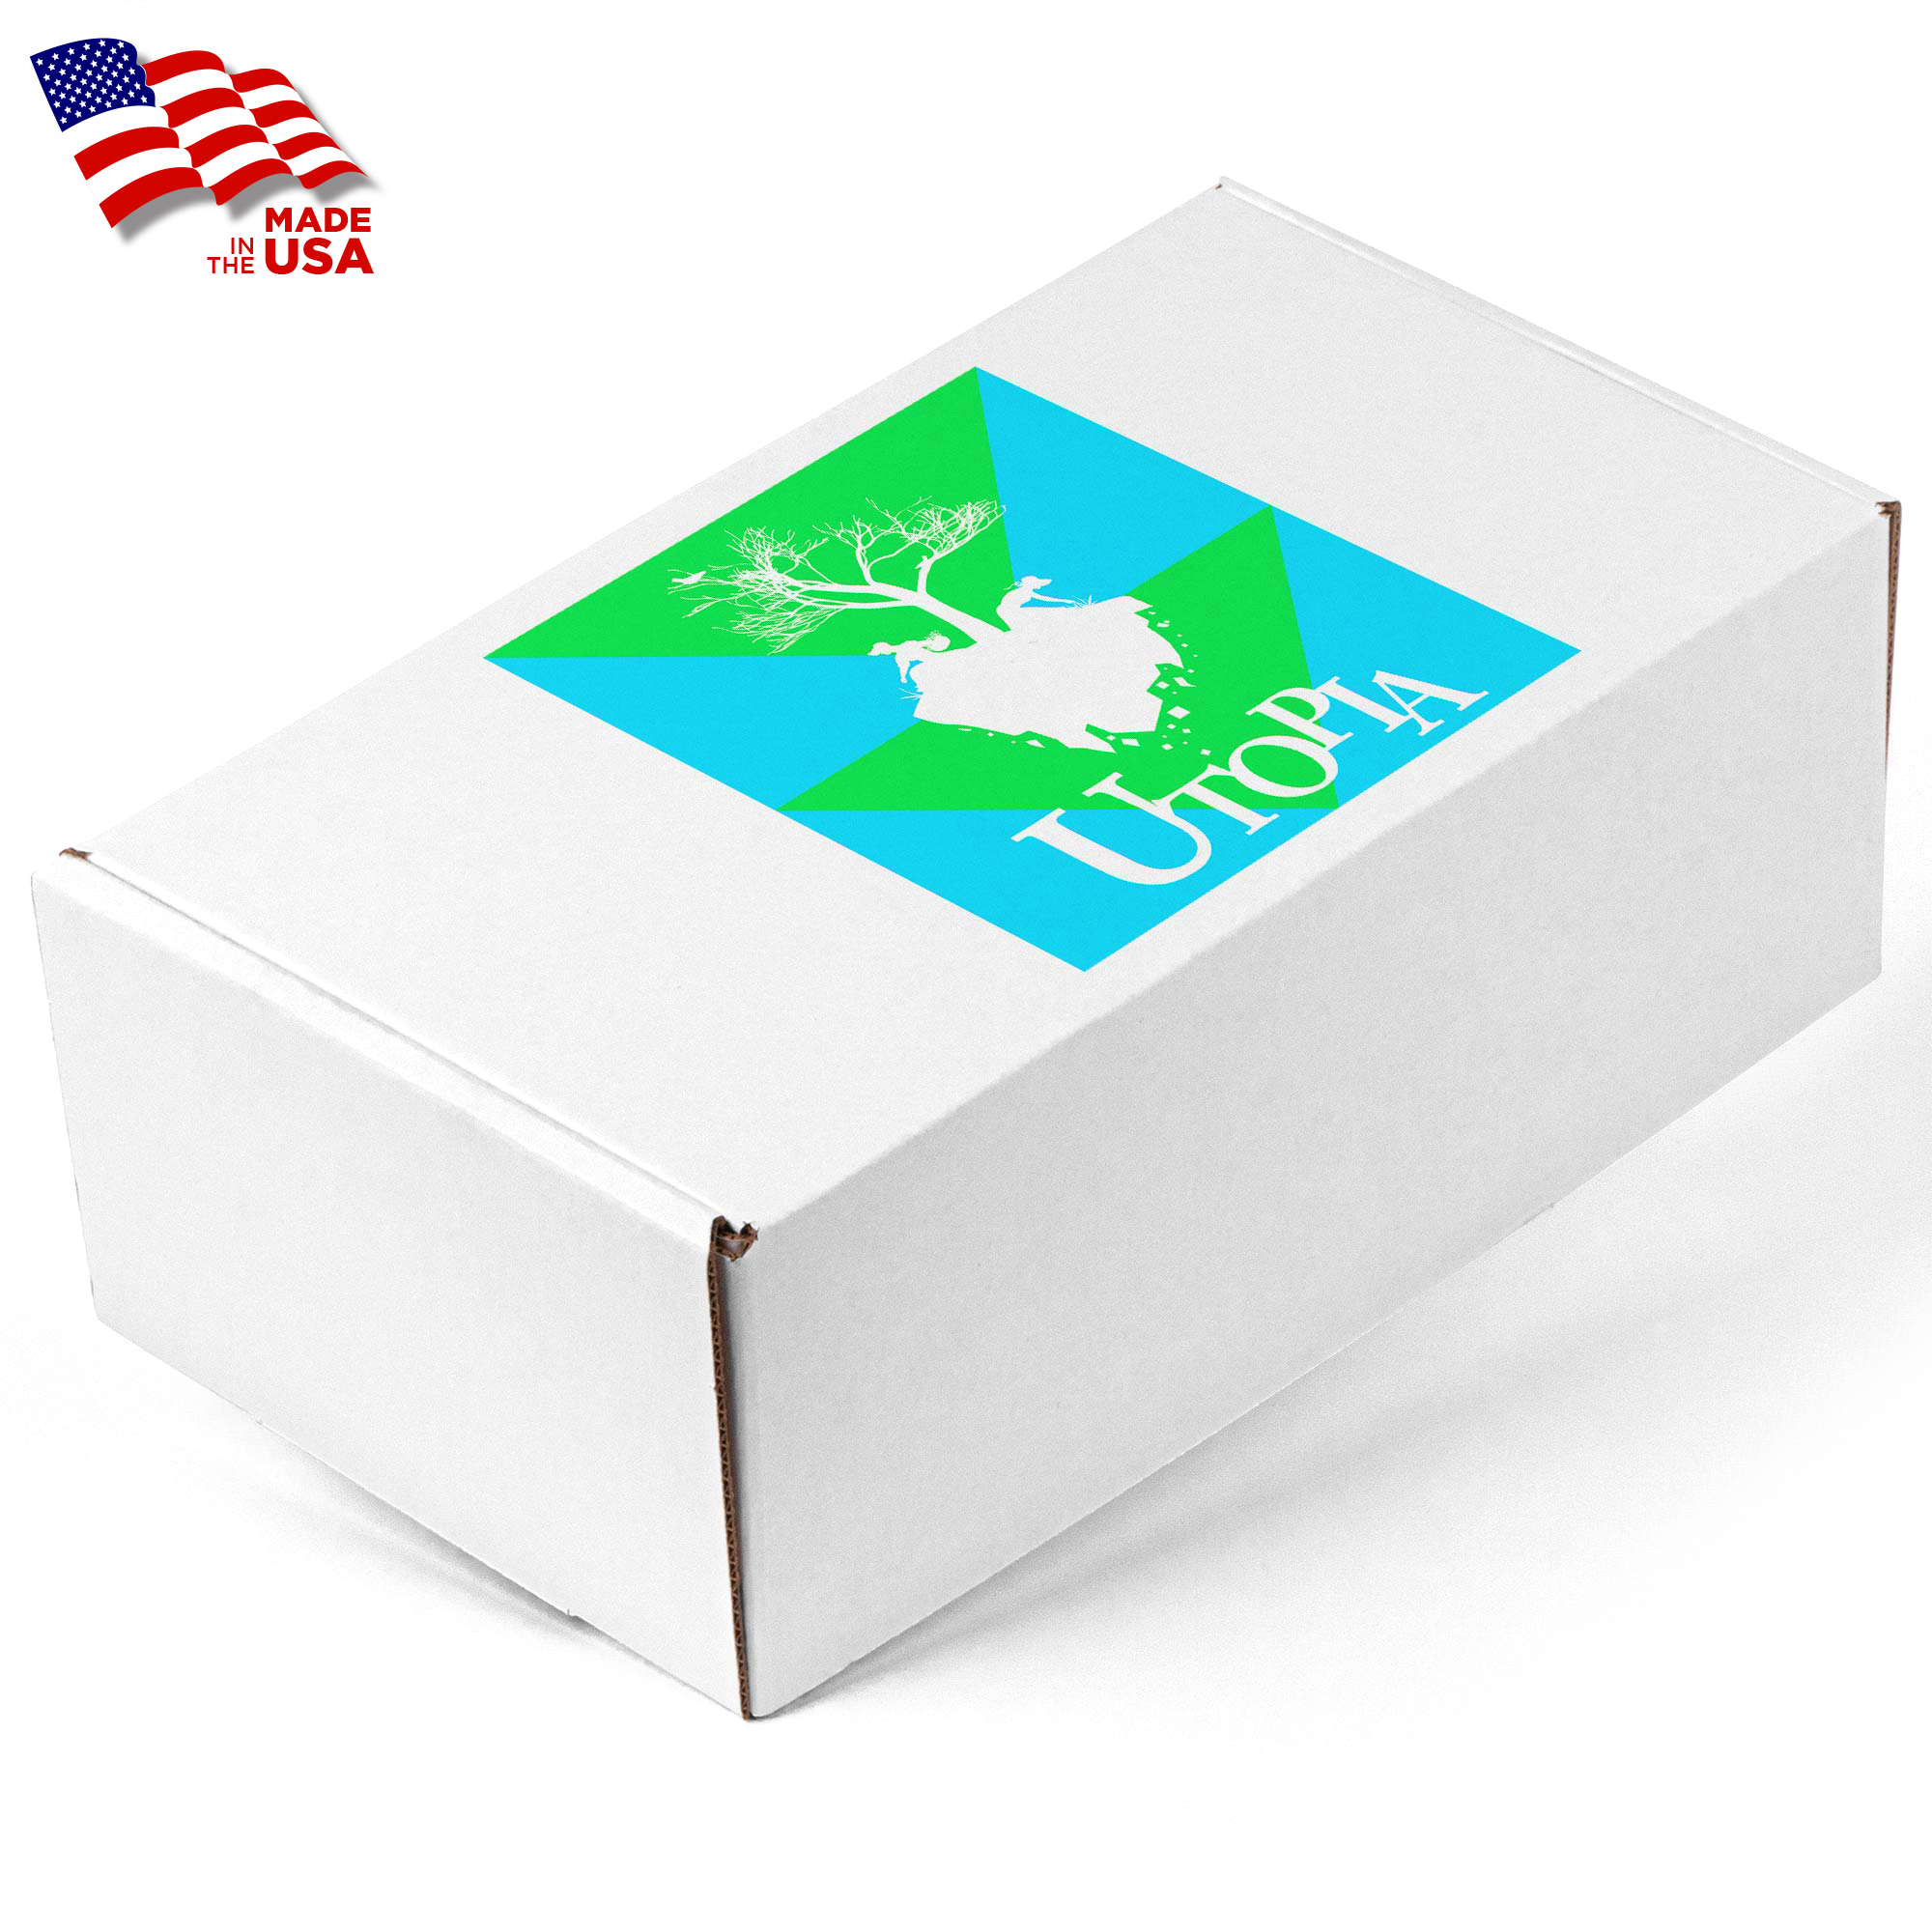 Screen Printed Corrugated Box Medium Box / 11x6.5x4 For Mailers, Gifting And Kits / (White Box Print, 1/0, Matte) - Printed boxes are a great way for making a custom branded presentations, direct mail marketing campaigns, custom gifts, subscription boxes, influencer boxes, 'Welcome' kits, new product launches and more! Customize these boxes with your brand's message with a screen print graphic that is eye catching and leaves a lasting impression. FEATURES: Eco-Friendly. Biodegradable. Compostable. Recyclable. Made in USA.